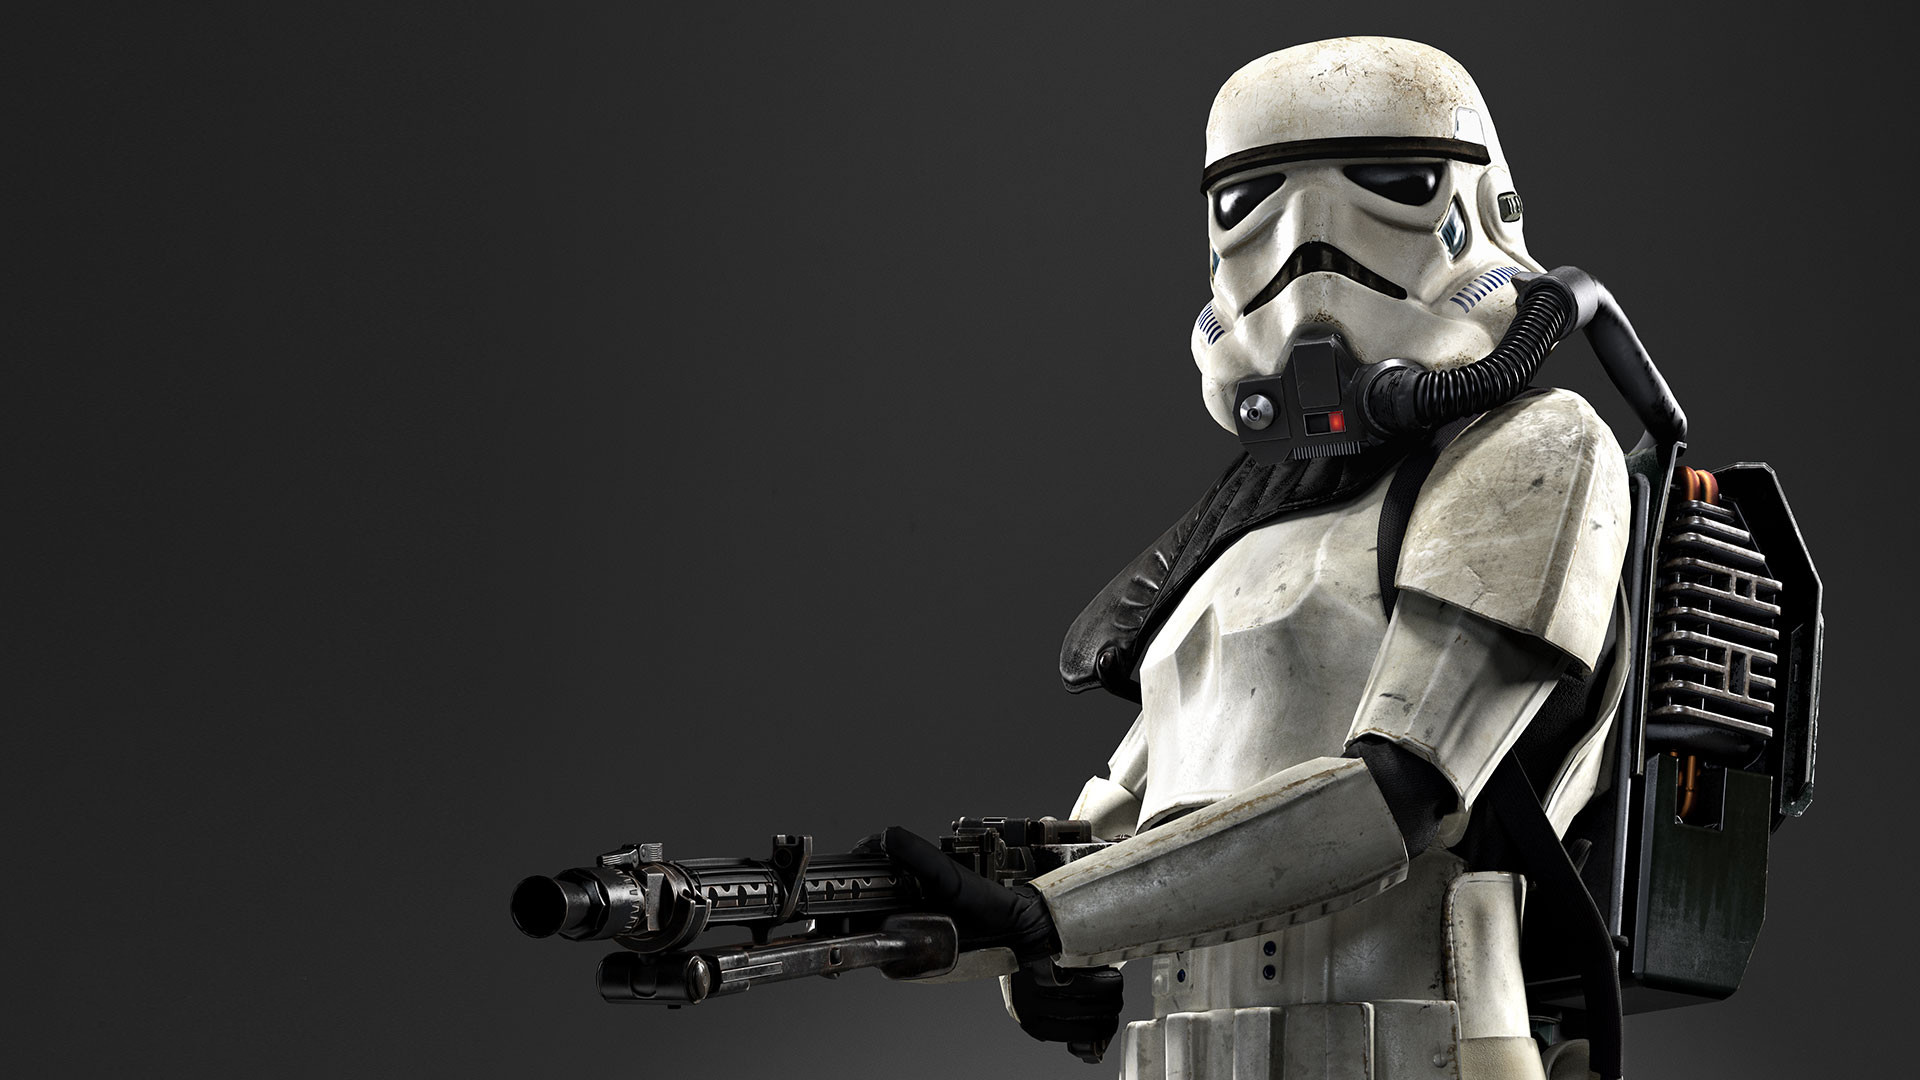 1920x1080 Star Wars Battlefront Wallpapers w/o Icons